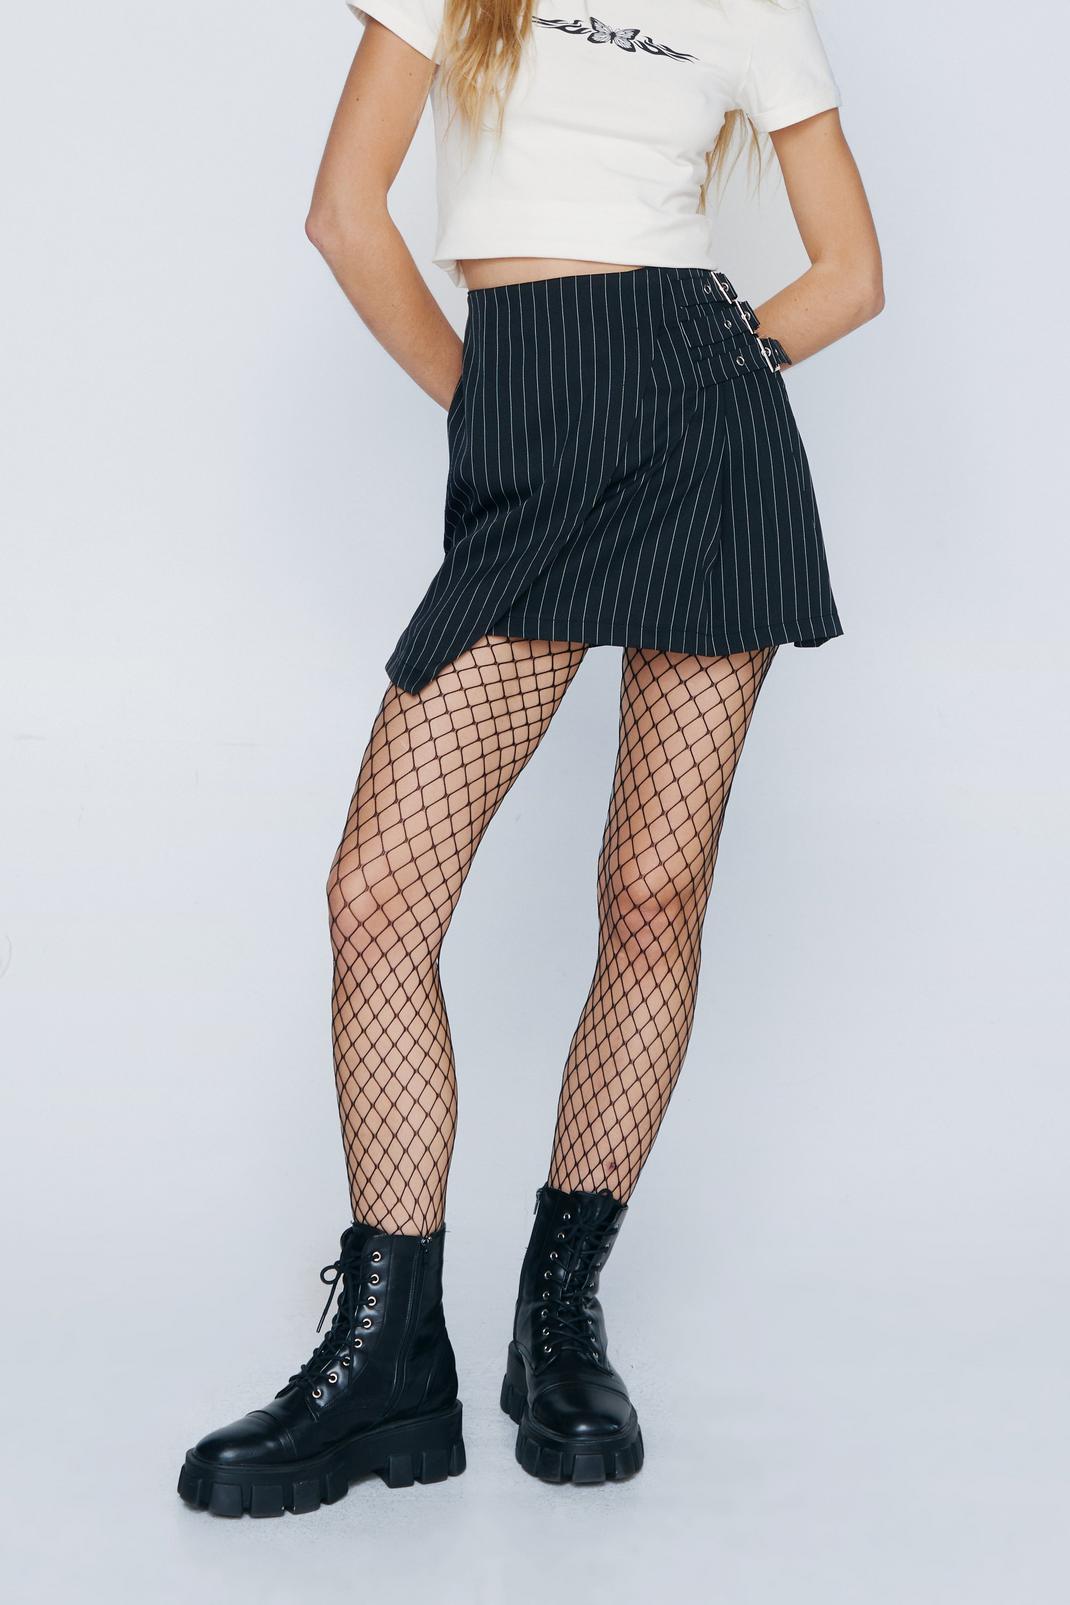 Best of Skirt with fishnet tights